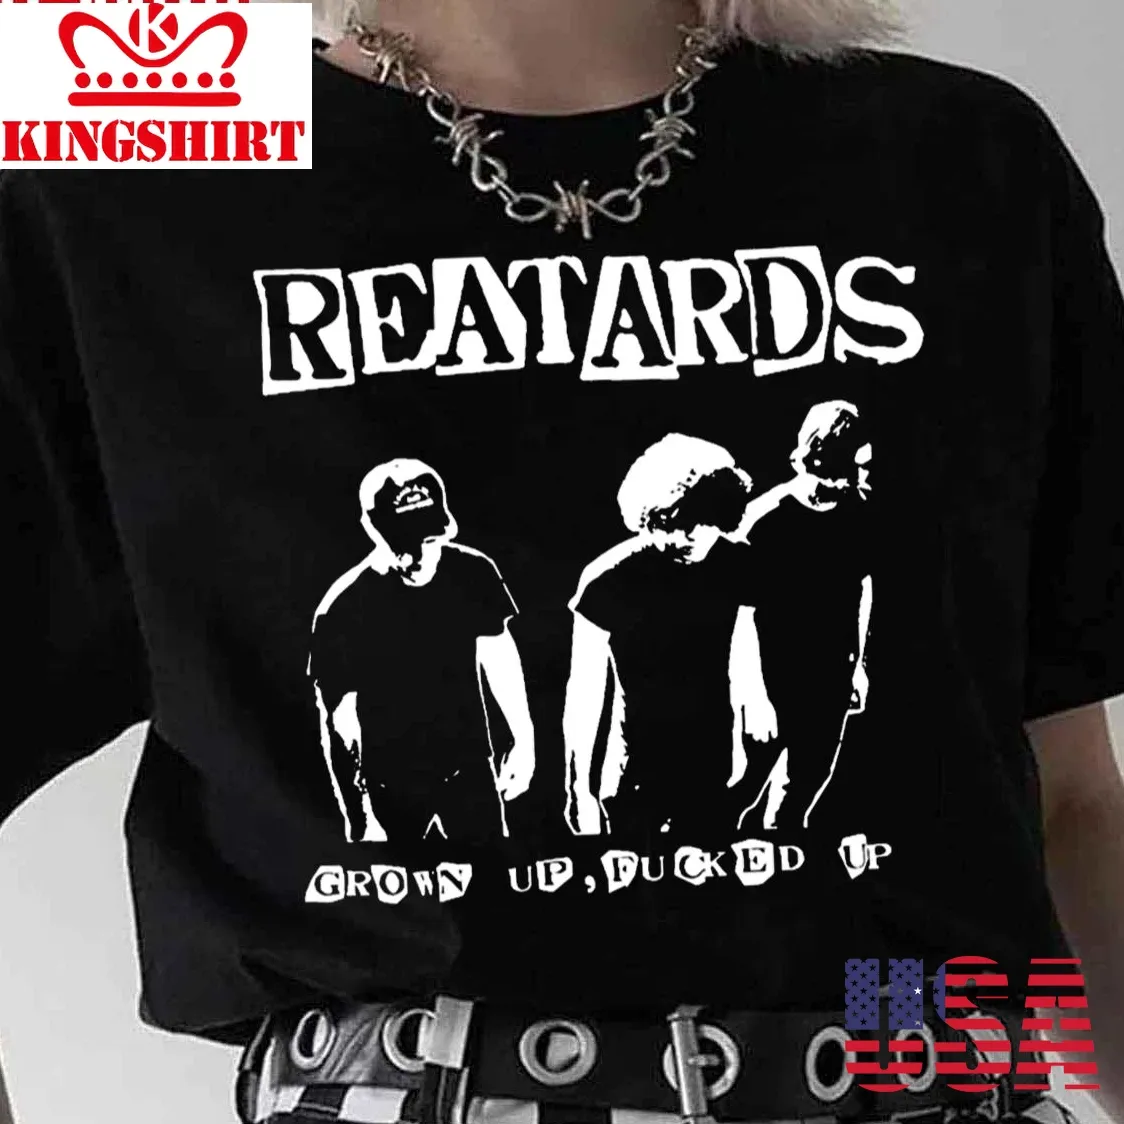 Reatards Grown Up Fucked Up Unisex T Shirt